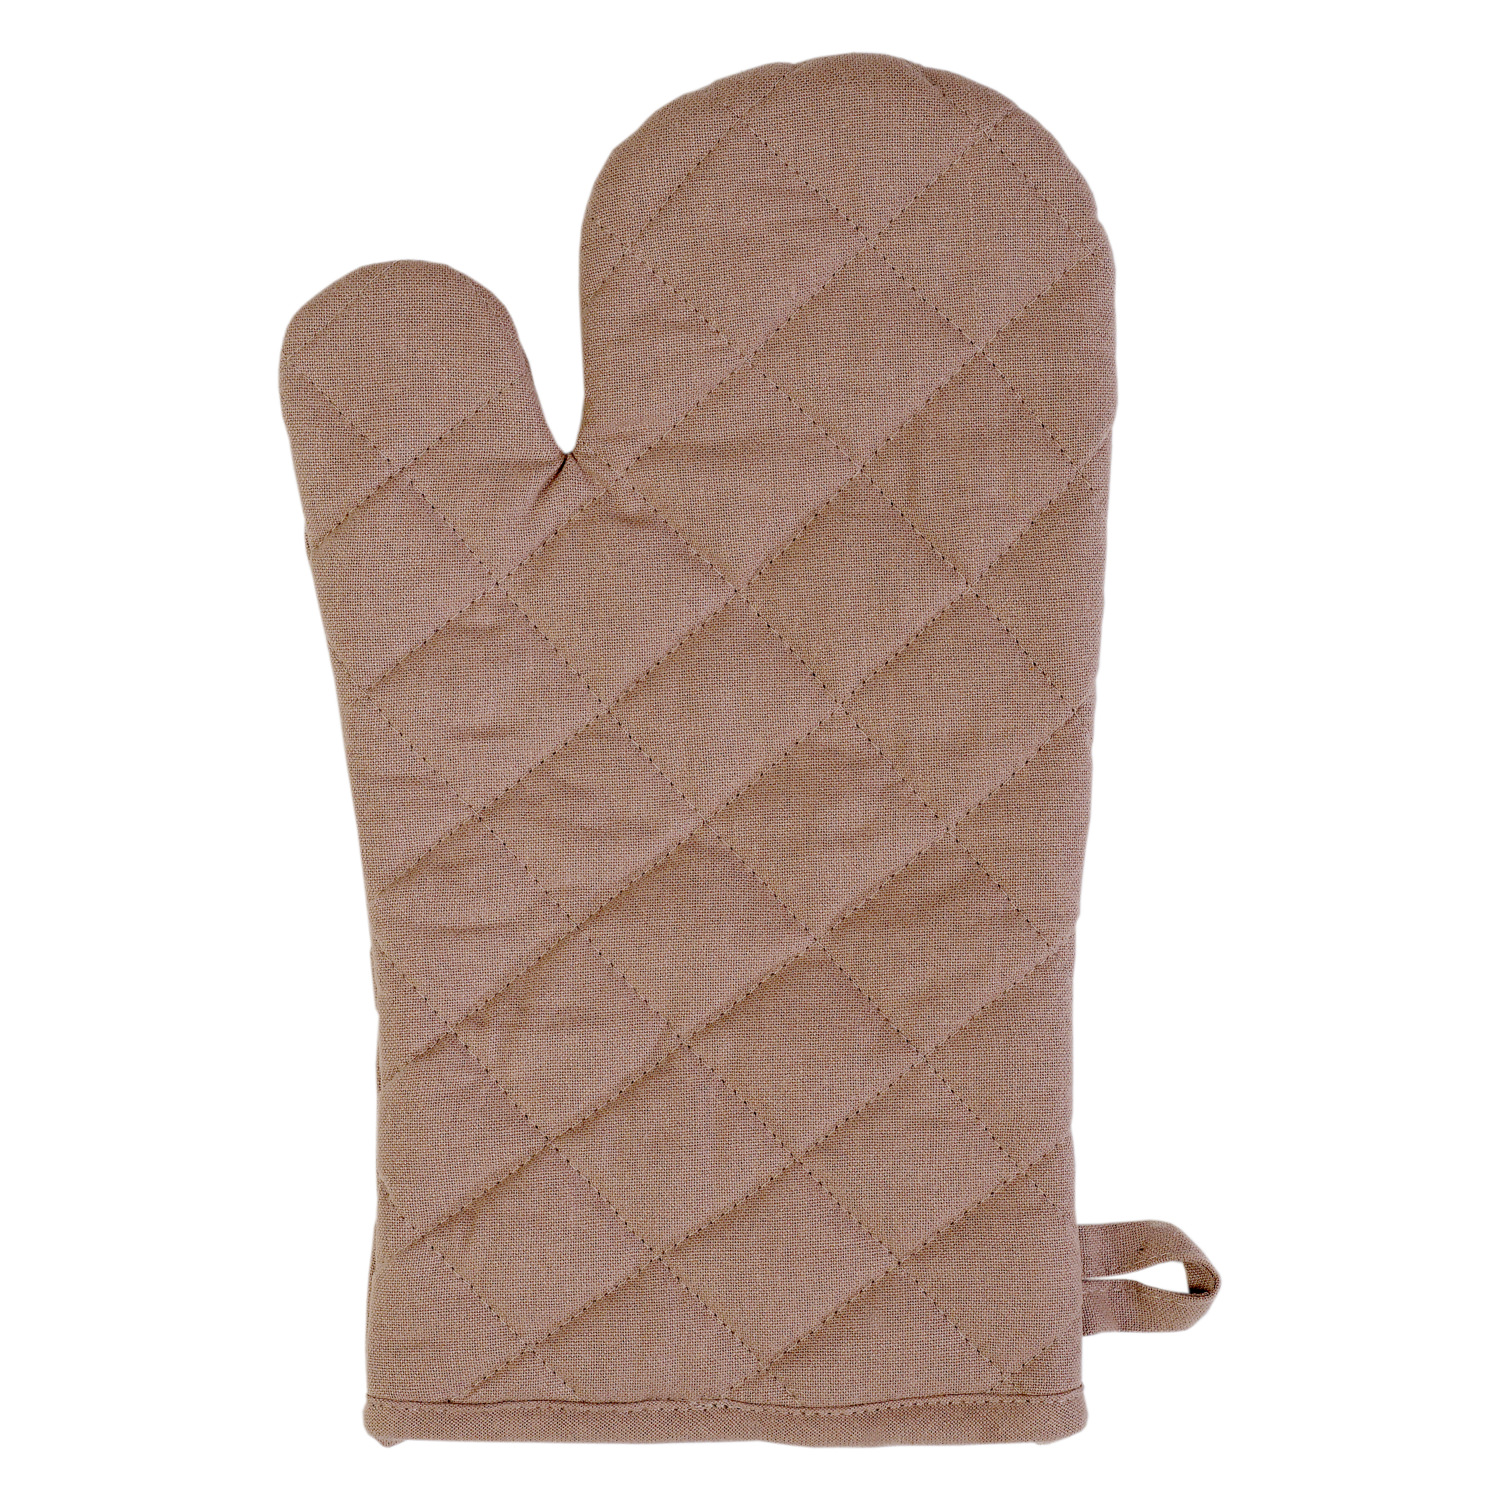 Ofenhandschuh (PSA) uni - Farbe taupe